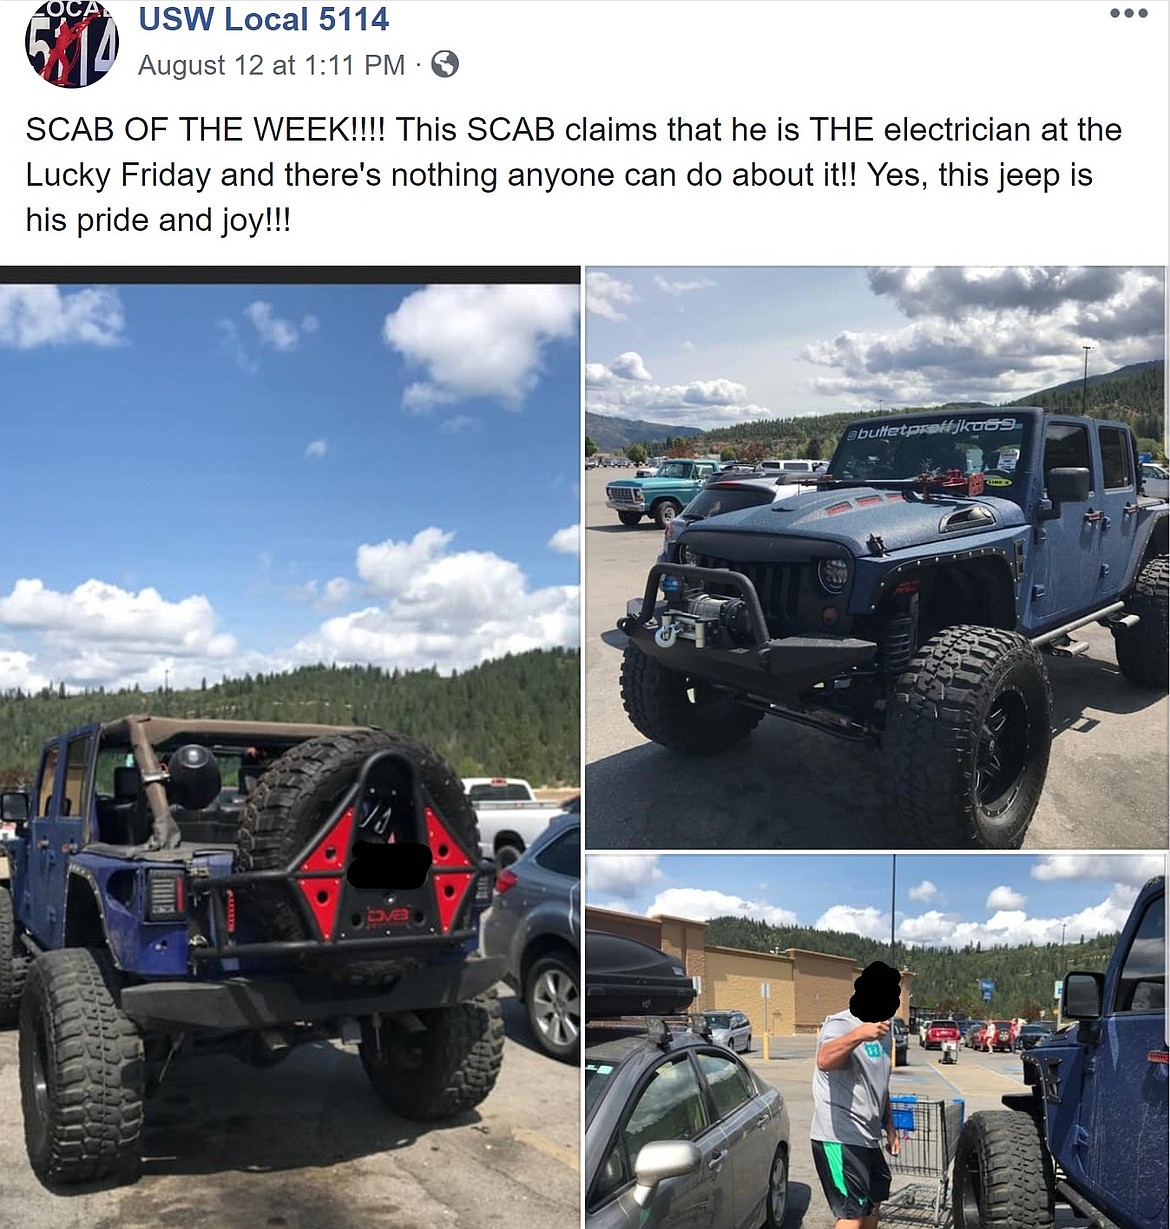 Photo from the USW LOCAL 5114 Facebook page/
The first post regarding the Jeep and its driver on Aug. 12.